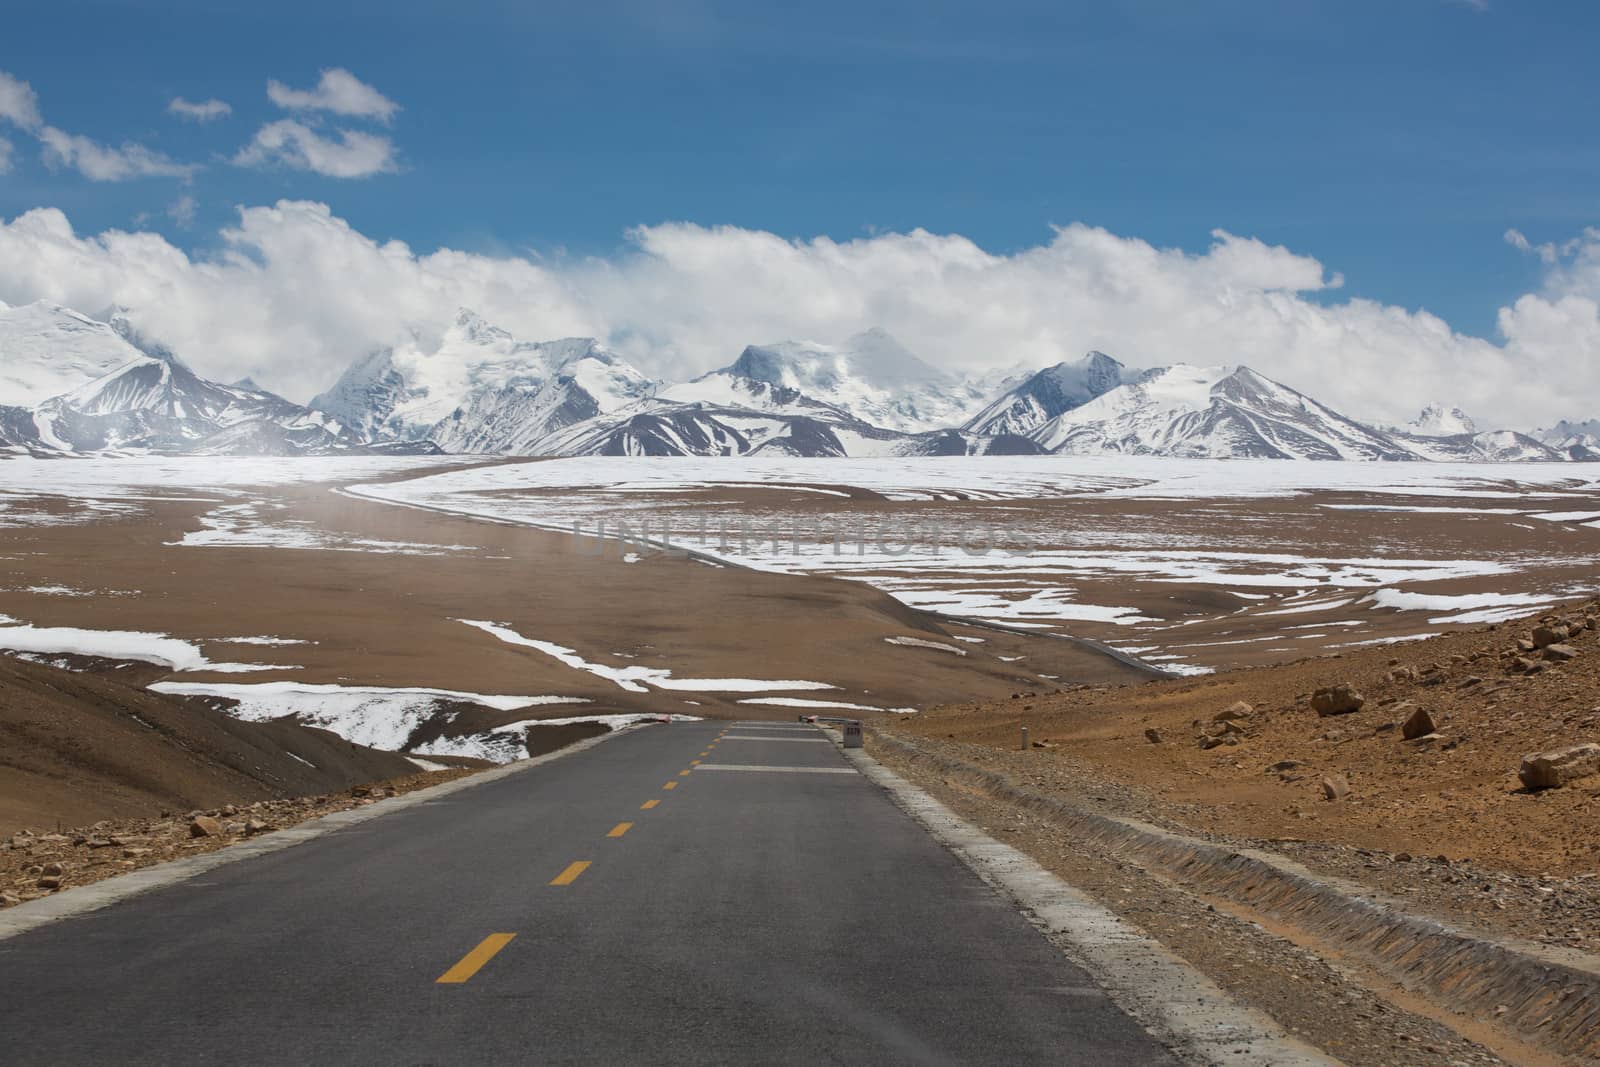 Straight road with a yellow dotted line in the middle with Tibetan landscape of Mountains in the background. The road seems to go toward the top of the snowed mountain in the cloud.